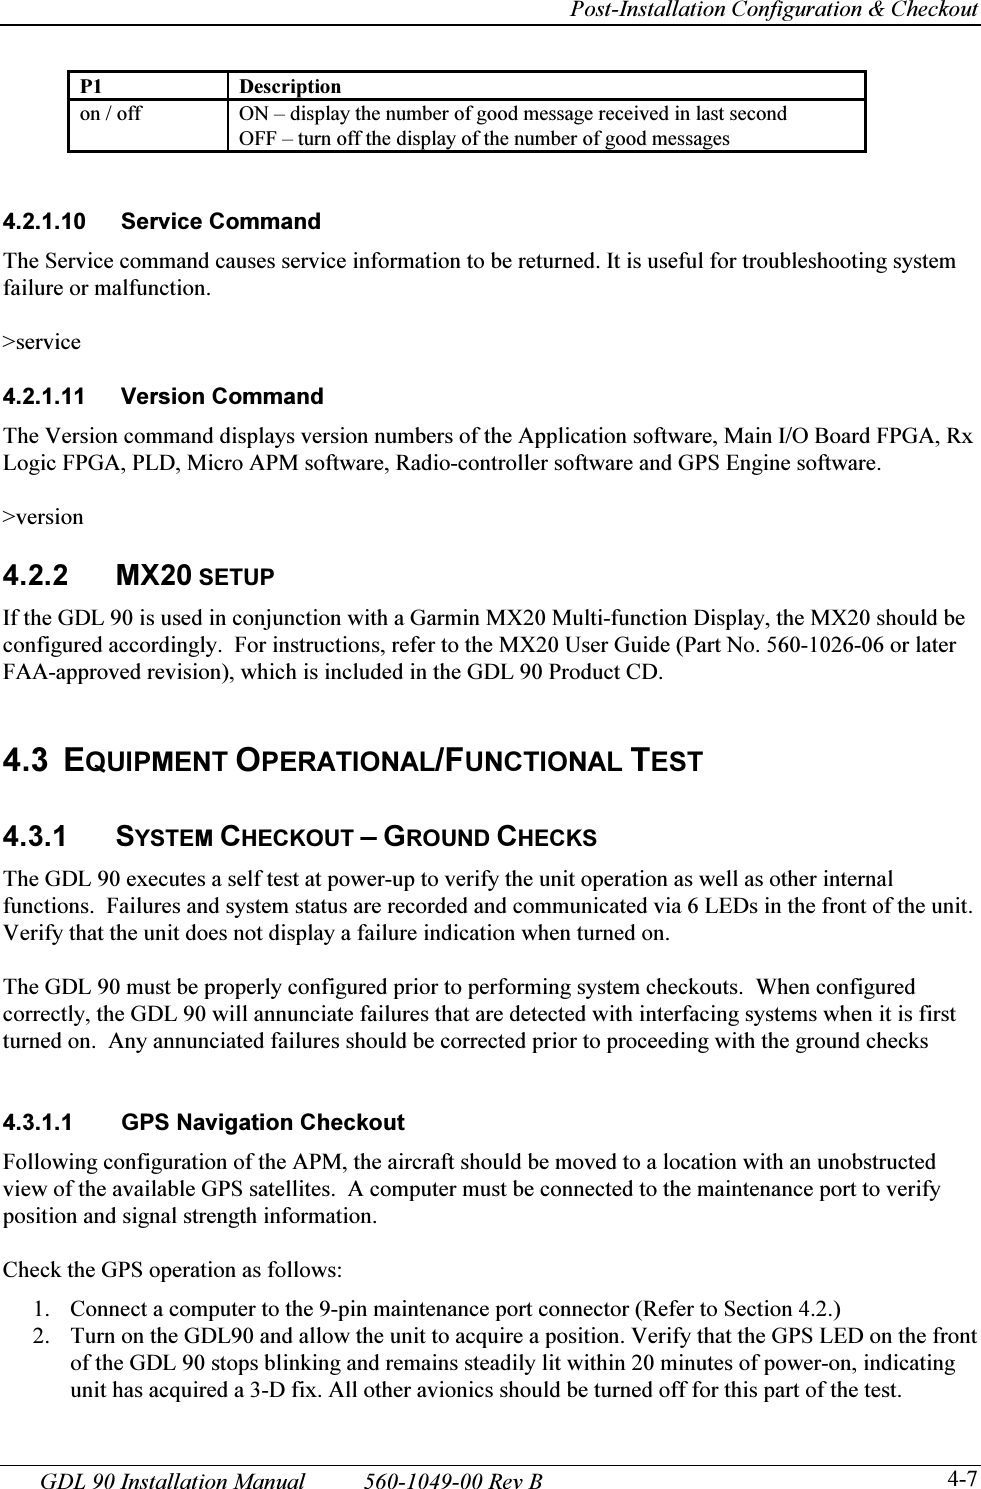     Post-Installation Configuration &amp; Checkout GDL 90 Installation Manual  560-1049-00 Rev B   4-7P1 Description on / off  ON – display the number of good message received in last second OFF – turn off the display of the number of good messages   4.2.1.10 Service Command The Service command causes service information to be returned. It is useful for troubleshooting system failure or malfunction.  &gt;service  4.2.1.11 Version Command The Version command displays version numbers of the Application software, Main I/O Board FPGA, Rx Logic FPGA, PLD, Micro APM software, Radio-controller software and GPS Engine software.  &gt;version  4.2.2 MX20 SETUP If the GDL 90 is used in conjunction with a Garmin MX20 Multi-function Display, the MX20 should be configured accordingly.  For instructions, refer to the MX20 User Guide (Part No. 560-1026-06 or later FAA-approved revision), which is included in the GDL 90 Product CD.   4.3 EQUIPMENT OPERATIONAL/FUNCTIONAL TEST  4.3.1 SYSTEM CHECKOUT – GROUND CHECKS The GDL 90 executes a self test at power-up to verify the unit operation as well as other internal functions.  Failures and system status are recorded and communicated via 6 LEDs in the front of the unit.  Verify that the unit does not display a failure indication when turned on.   The GDL 90 must be properly configured prior to performing system checkouts.  When configured correctly, the GDL 90 will annunciate failures that are detected with interfacing systems when it is first turned on.  Any annunciated failures should be corrected prior to proceeding with the ground checks   4.3.1.1  GPS Navigation Checkout Following configuration of the APM, the aircraft should be moved to a location with an unobstructed view of the available GPS satellites.  A computer must be connected to the maintenance port to verify position and signal strength information.  Check the GPS operation as follows: 1. Connect a computer to the 9-pin maintenance port connector (Refer to Section 4.2.) 2. Turn on the GDL90 and allow the unit to acquire a position. Verify that the GPS LED on the front of the GDL 90 stops blinking and remains steadily lit within 20 minutes of power-on, indicating unit has acquired a 3-D fix. All other avionics should be turned off for this part of the test. 